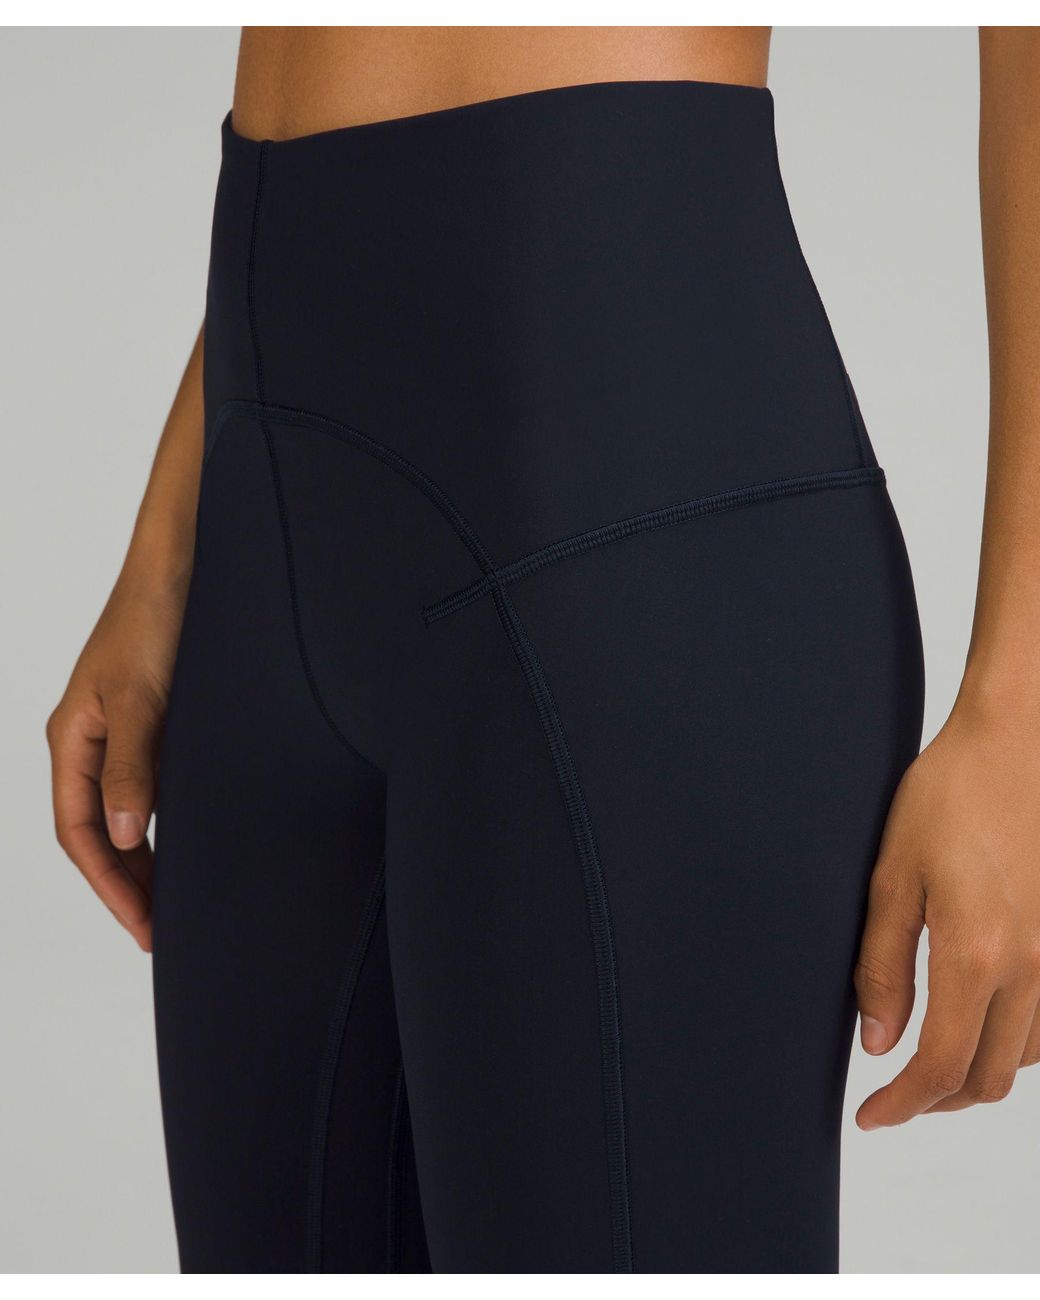 lululemon athletica Back-zip High-rise Paddle Tight 28 Online Only in Blue